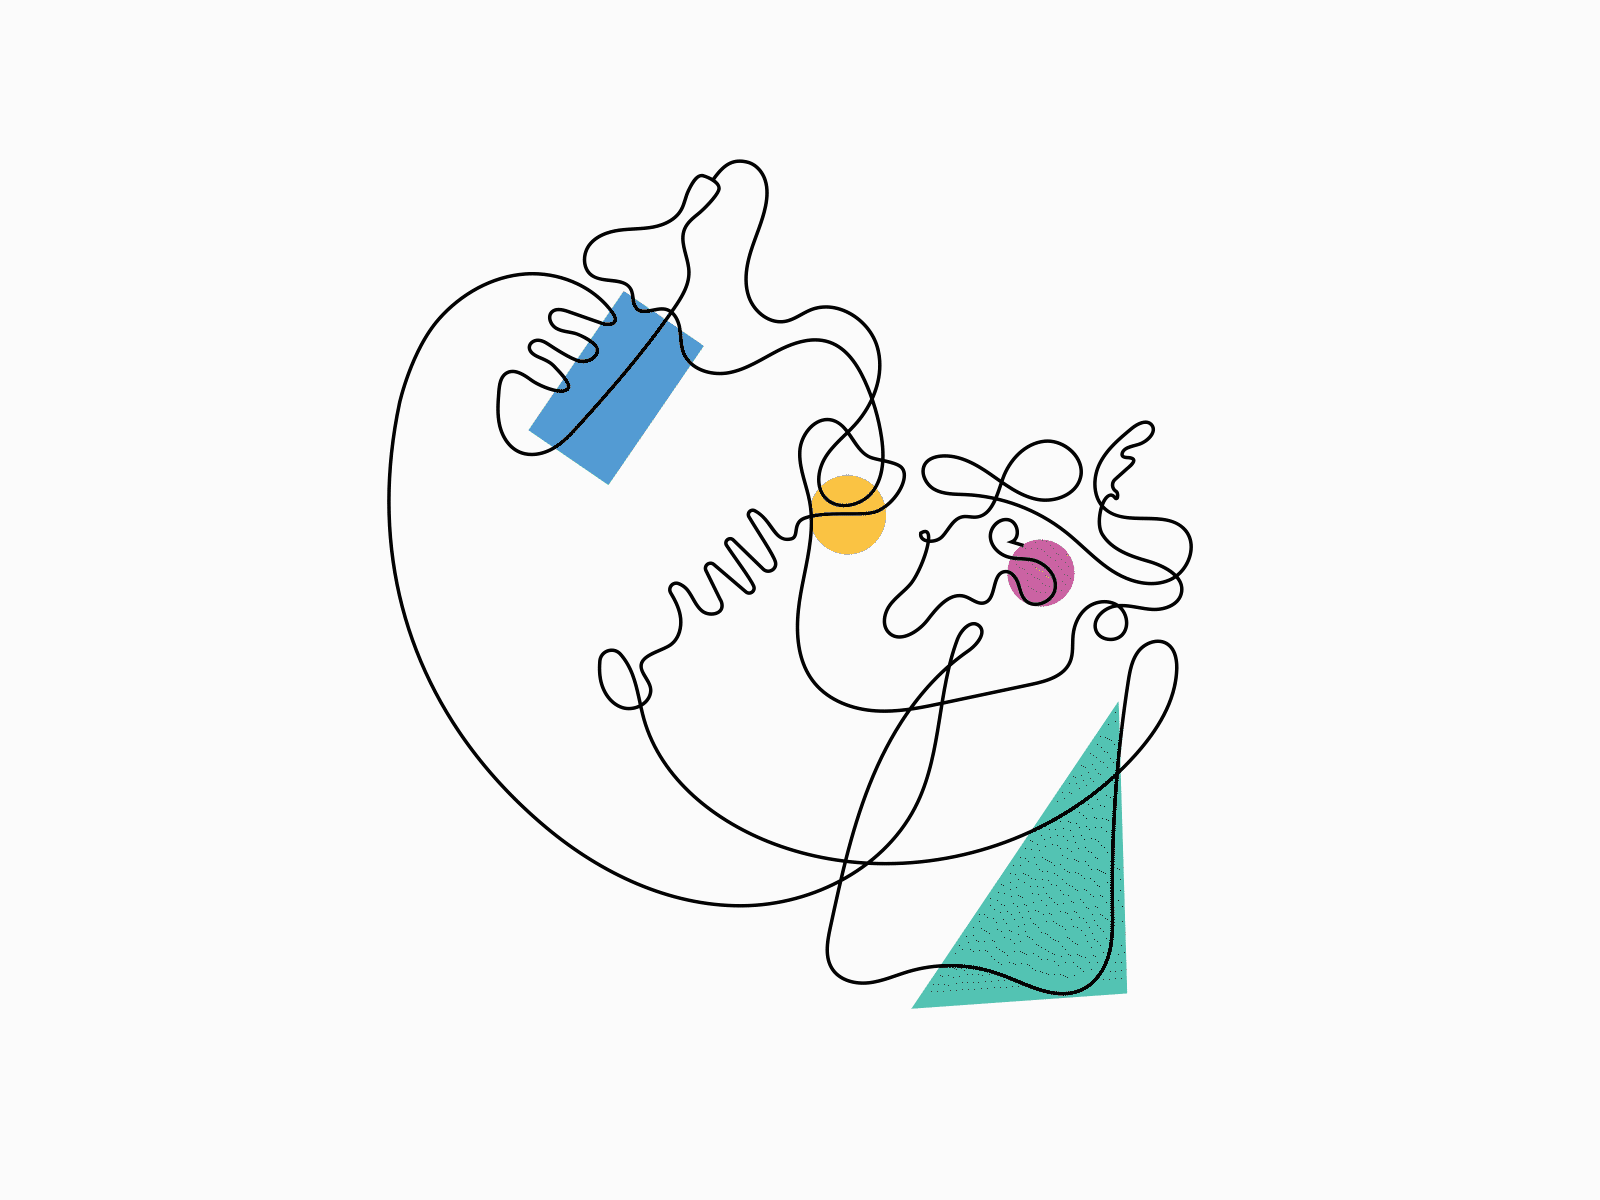 Drinking wine - single line illustration character character design clean color shapes drinking drinking wine hathaway illustration illustration agency krixi one line shapes single line wine wine bottle wine glass woman women